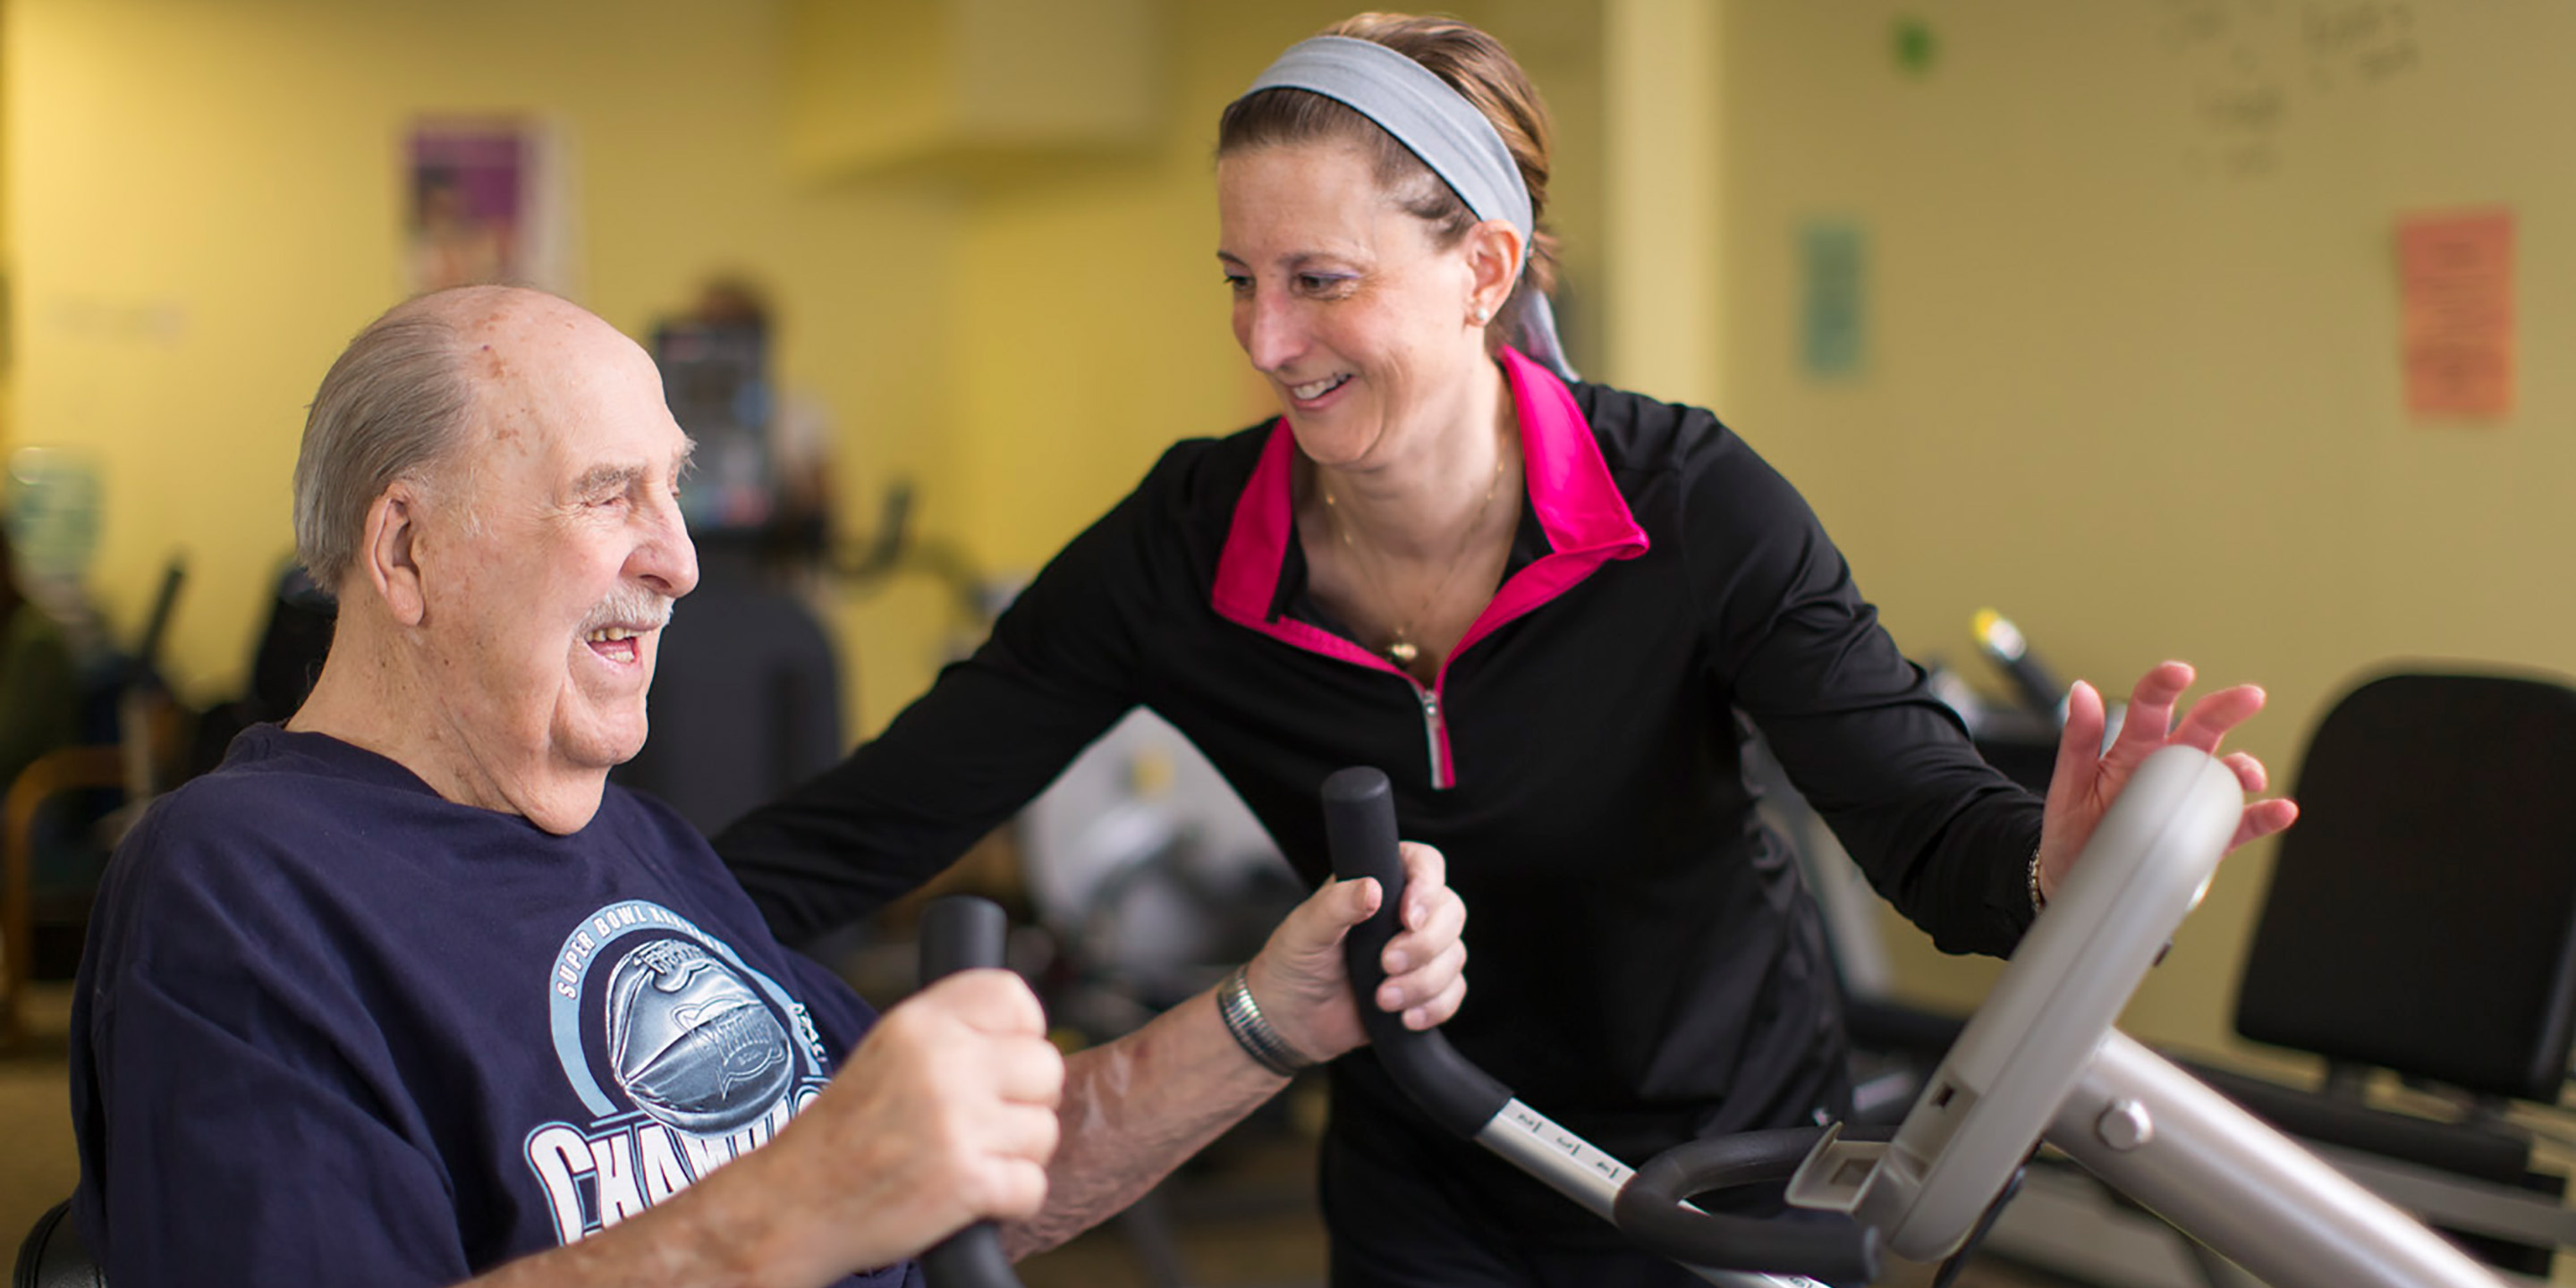 A female trainer helps an elder male while he works out on a stationary workout bike